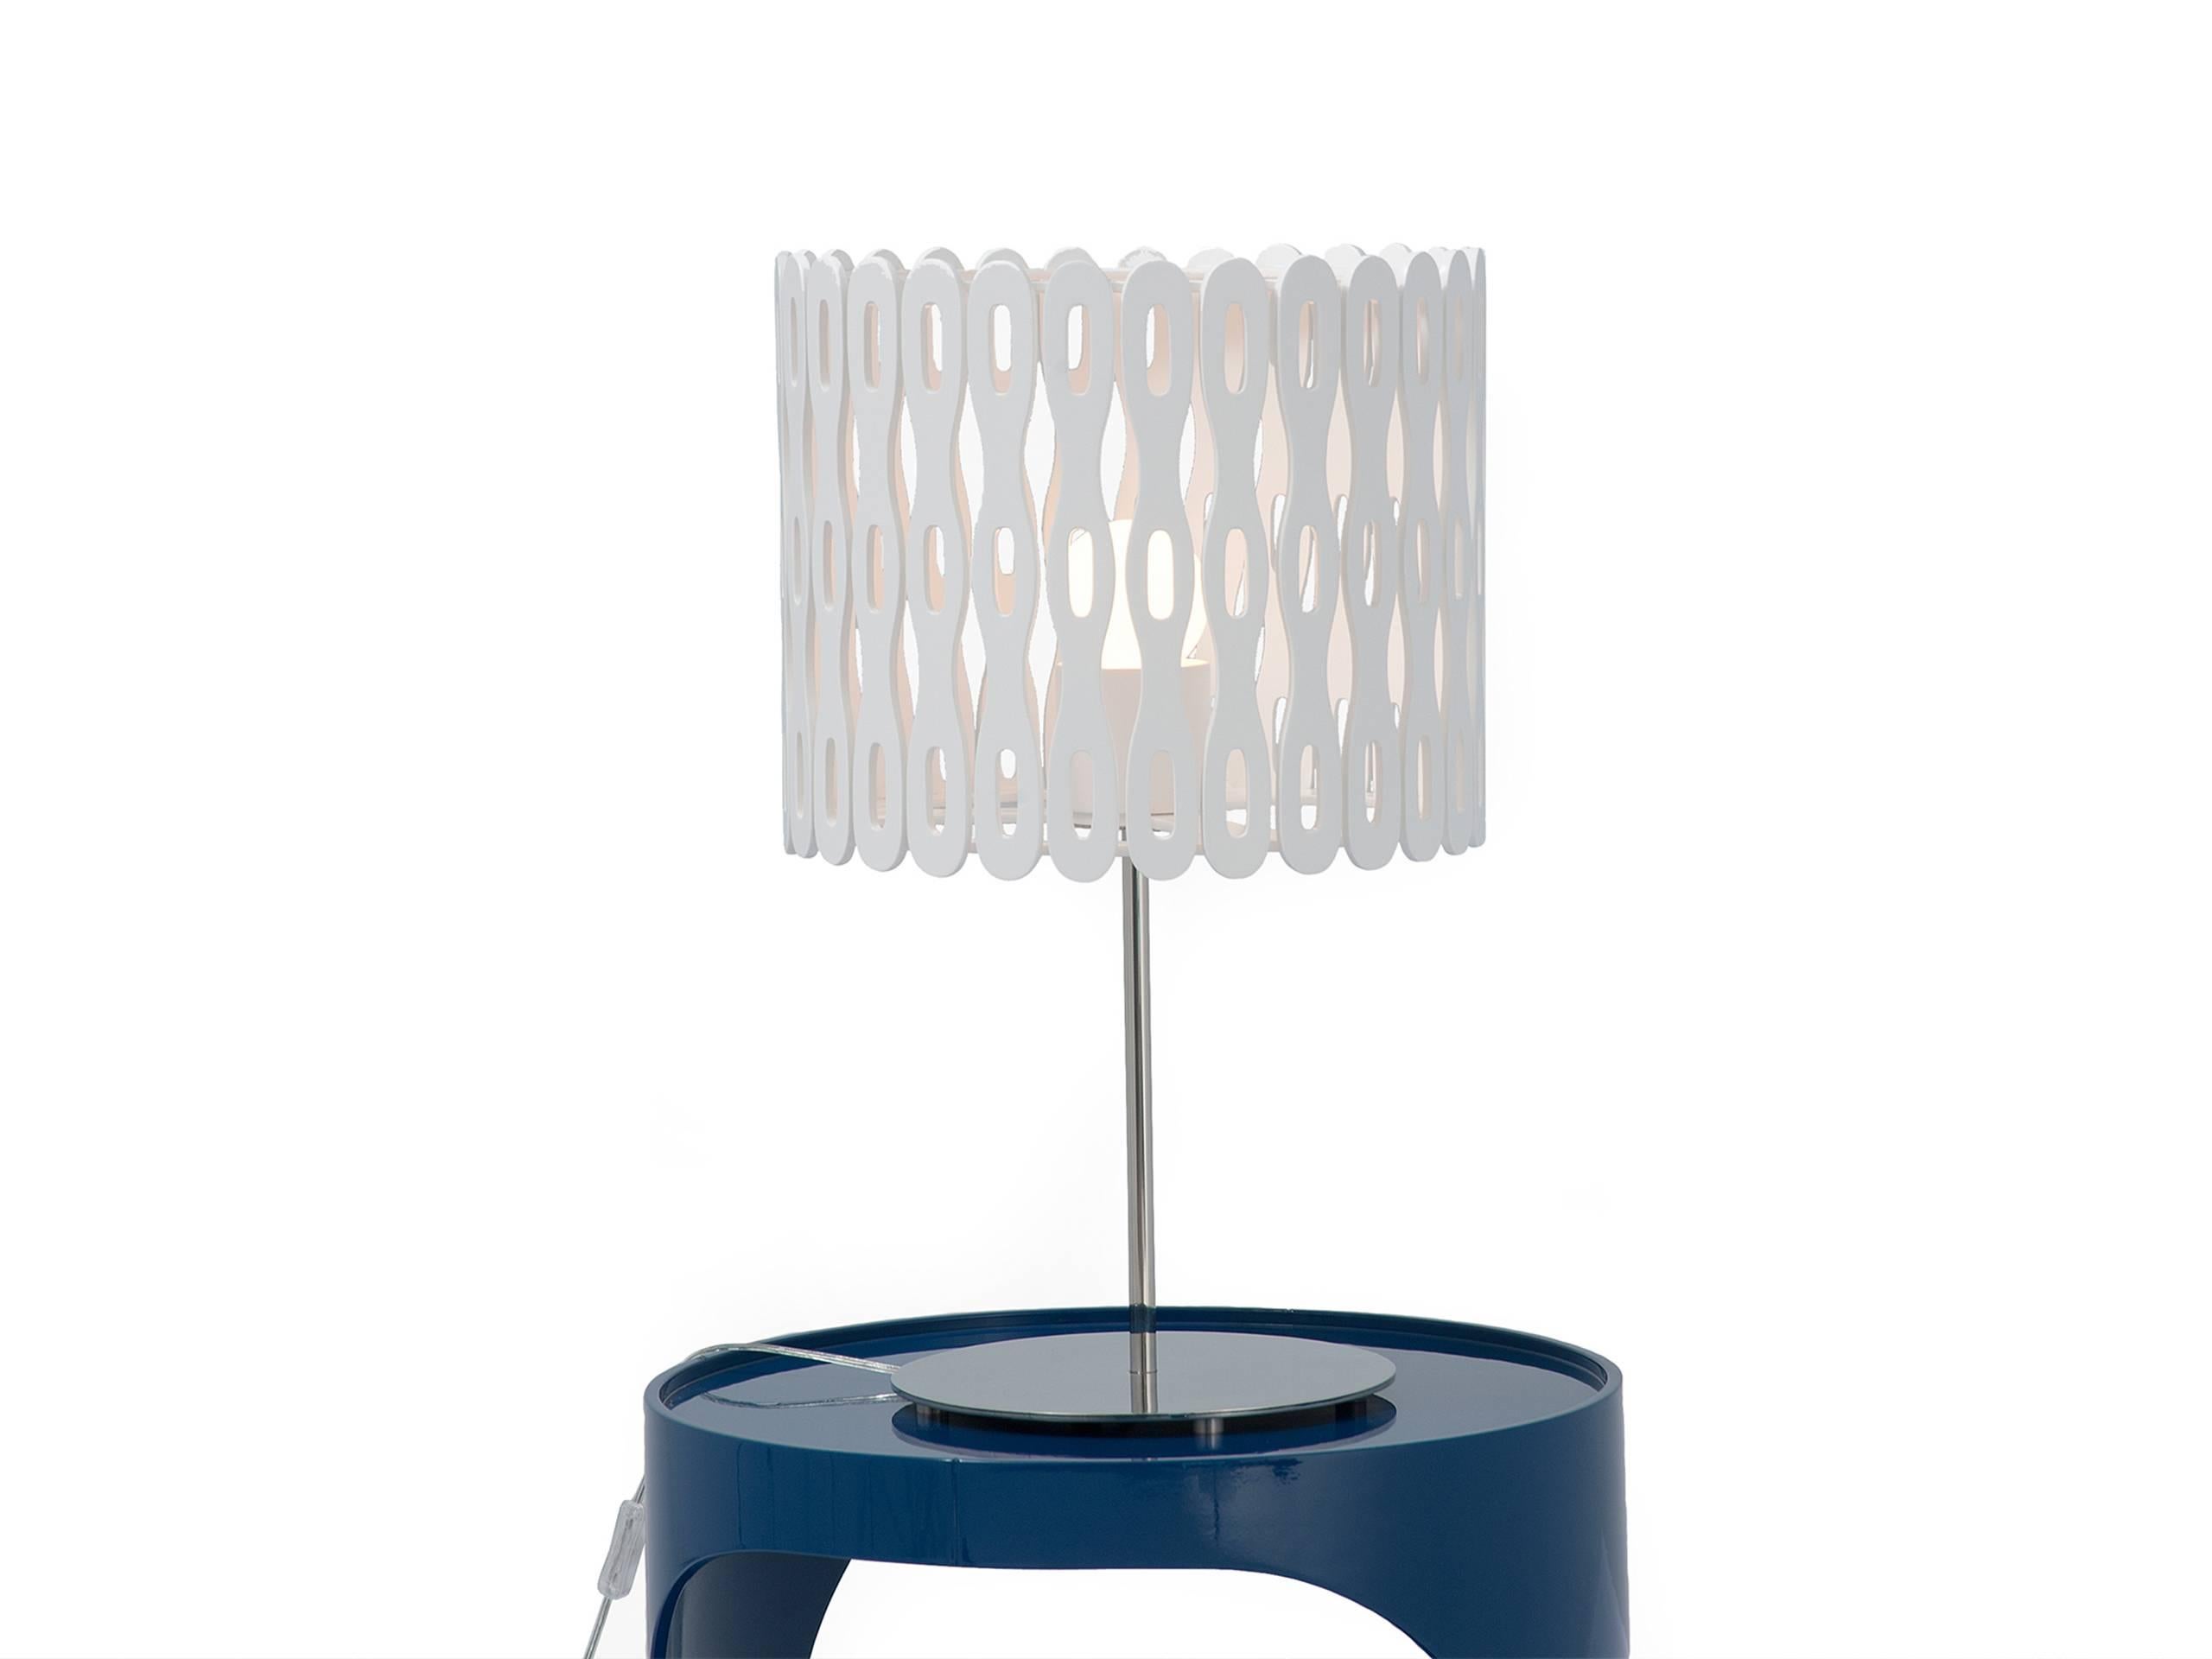 Stainless Steel Arpoador Brazilian Contemporary Graphic Pattern Cut Wood Table Lamp by Lattoog